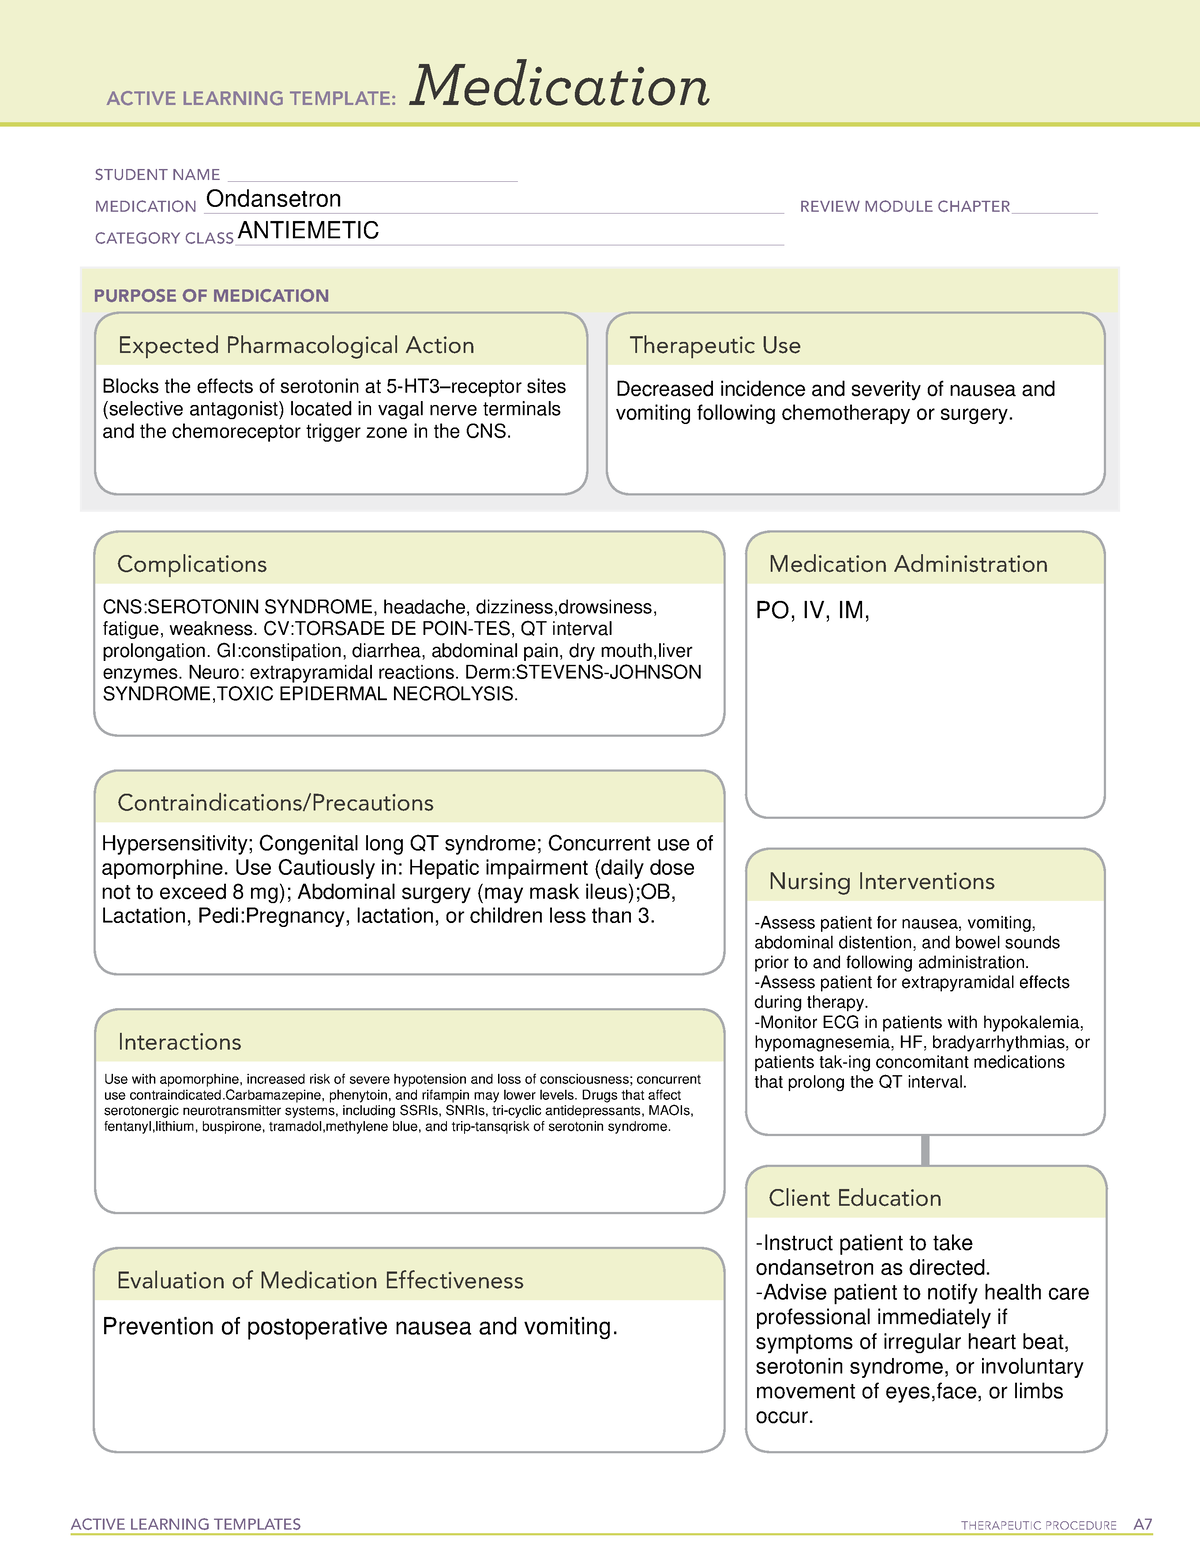 Ondansetron Active Learning Template